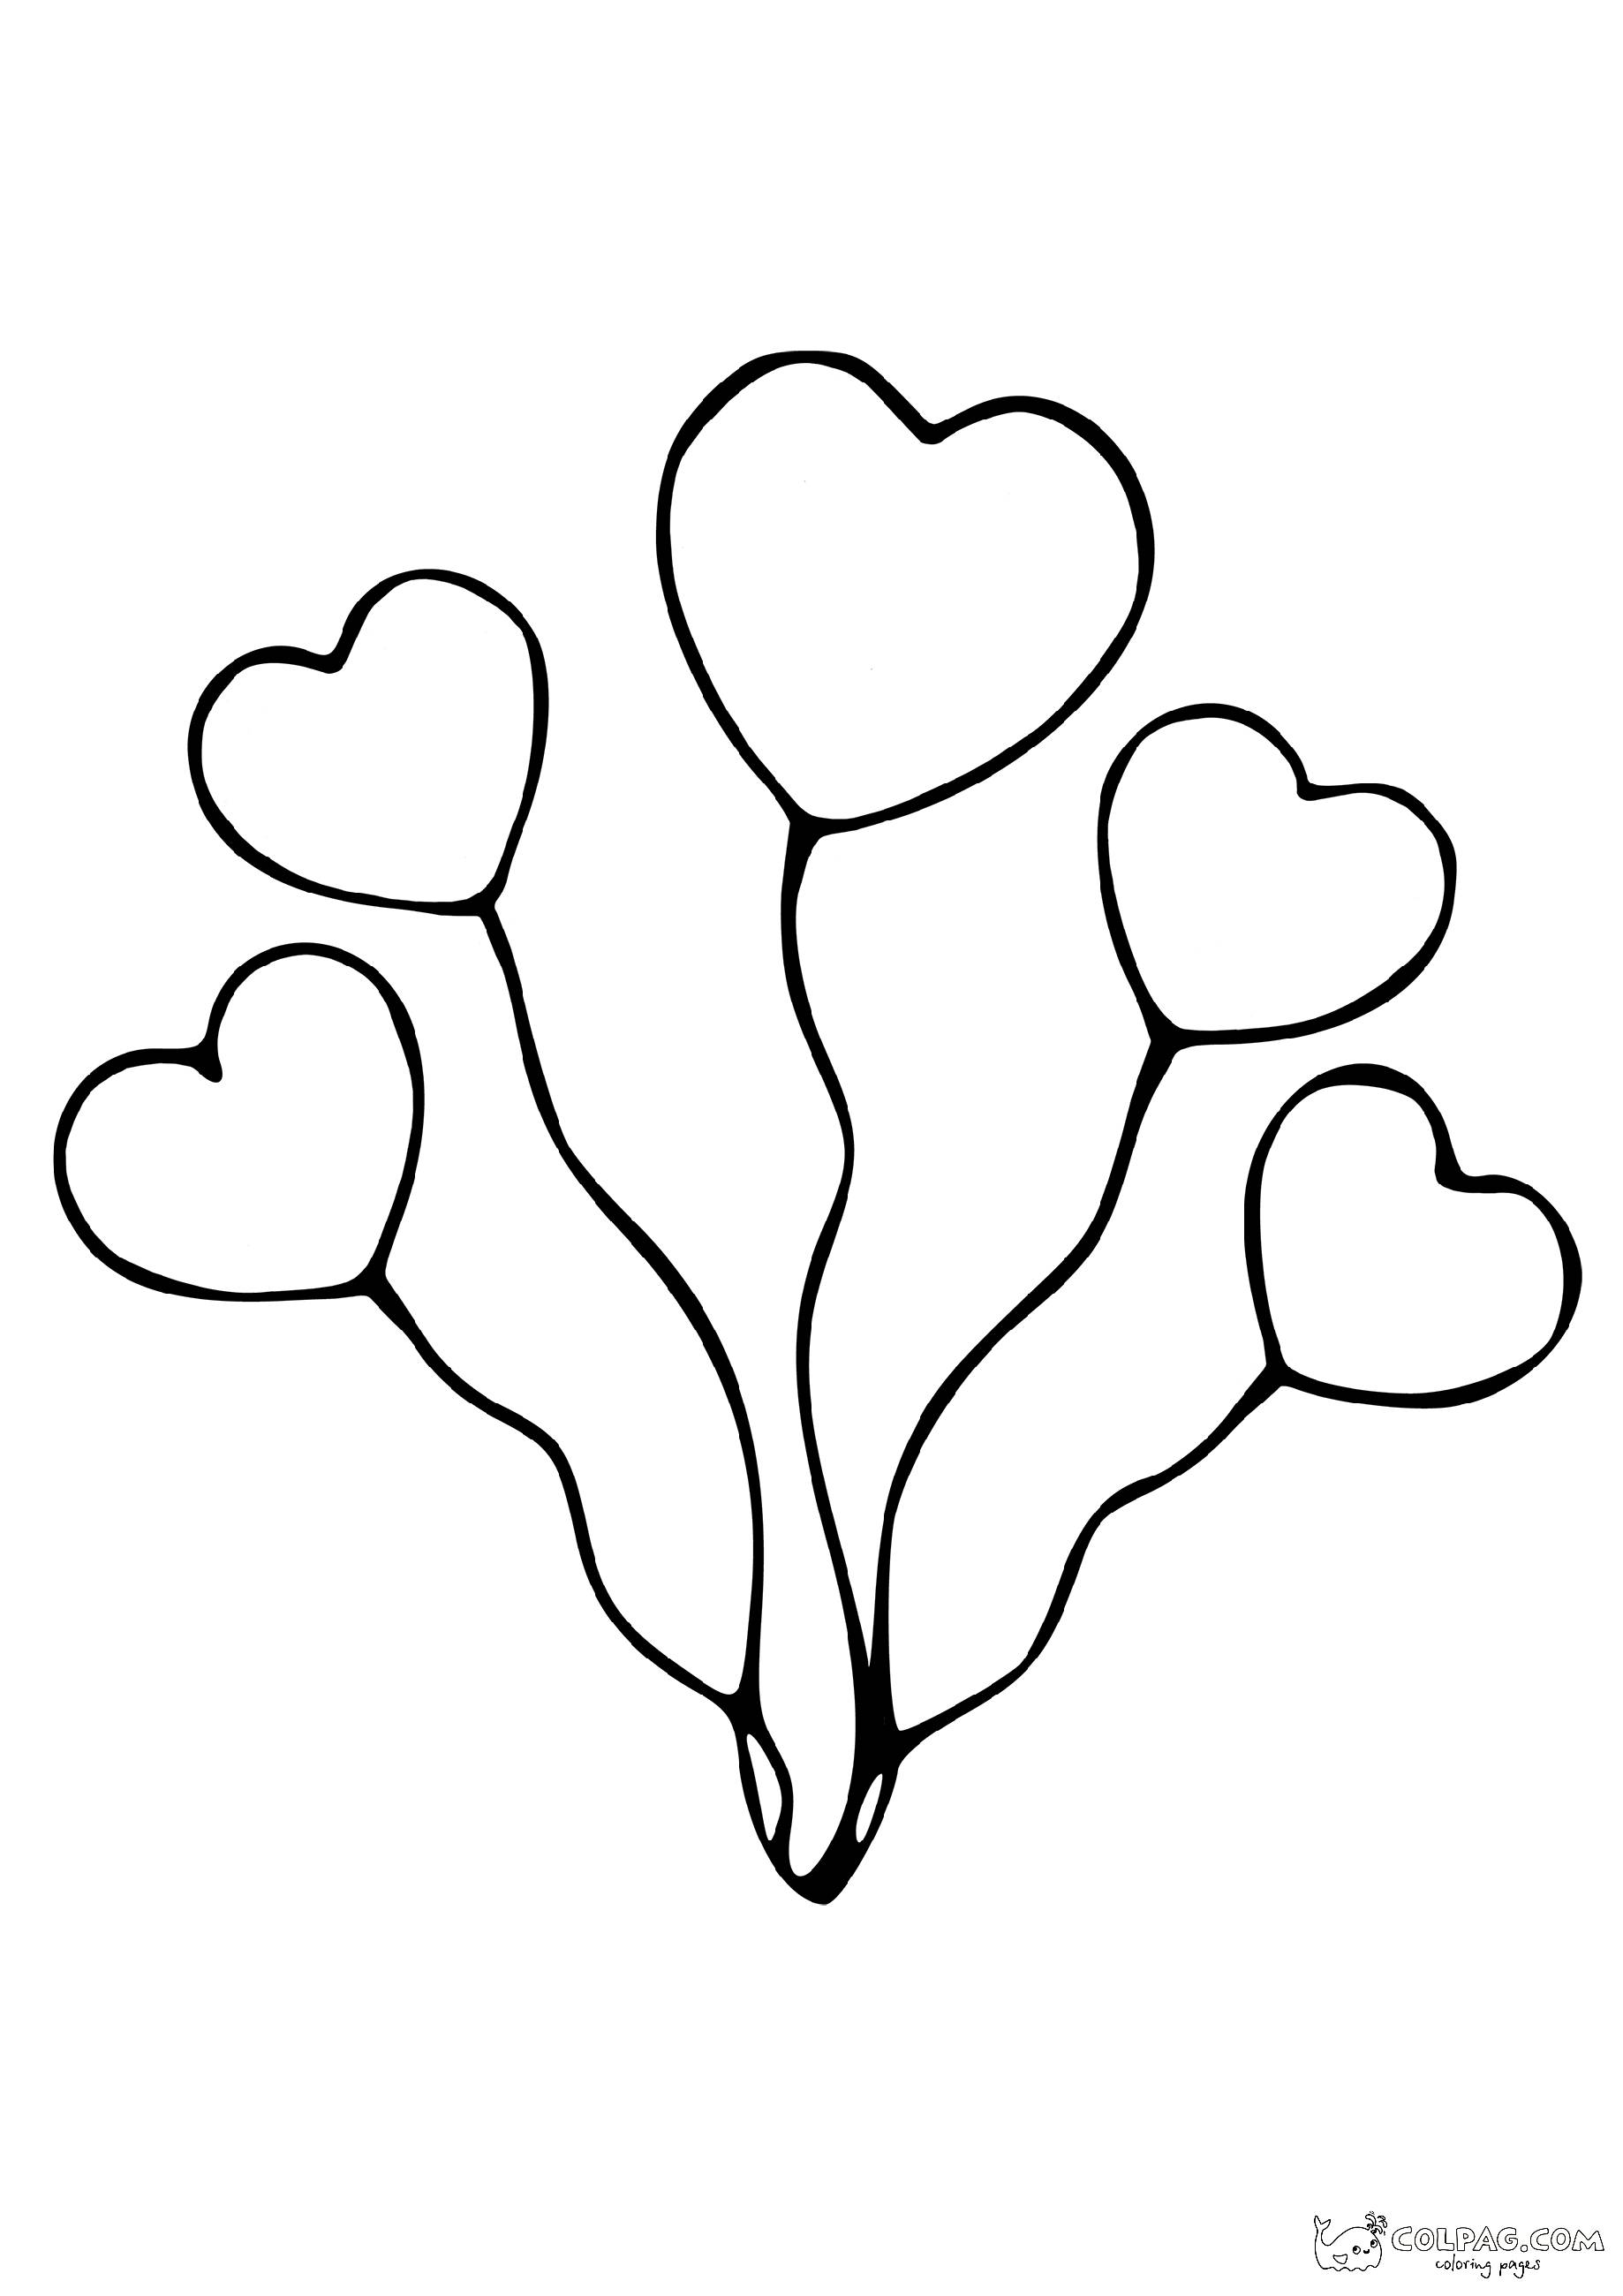 17-flying-hearts-baloons-coloring-page-colpag-17